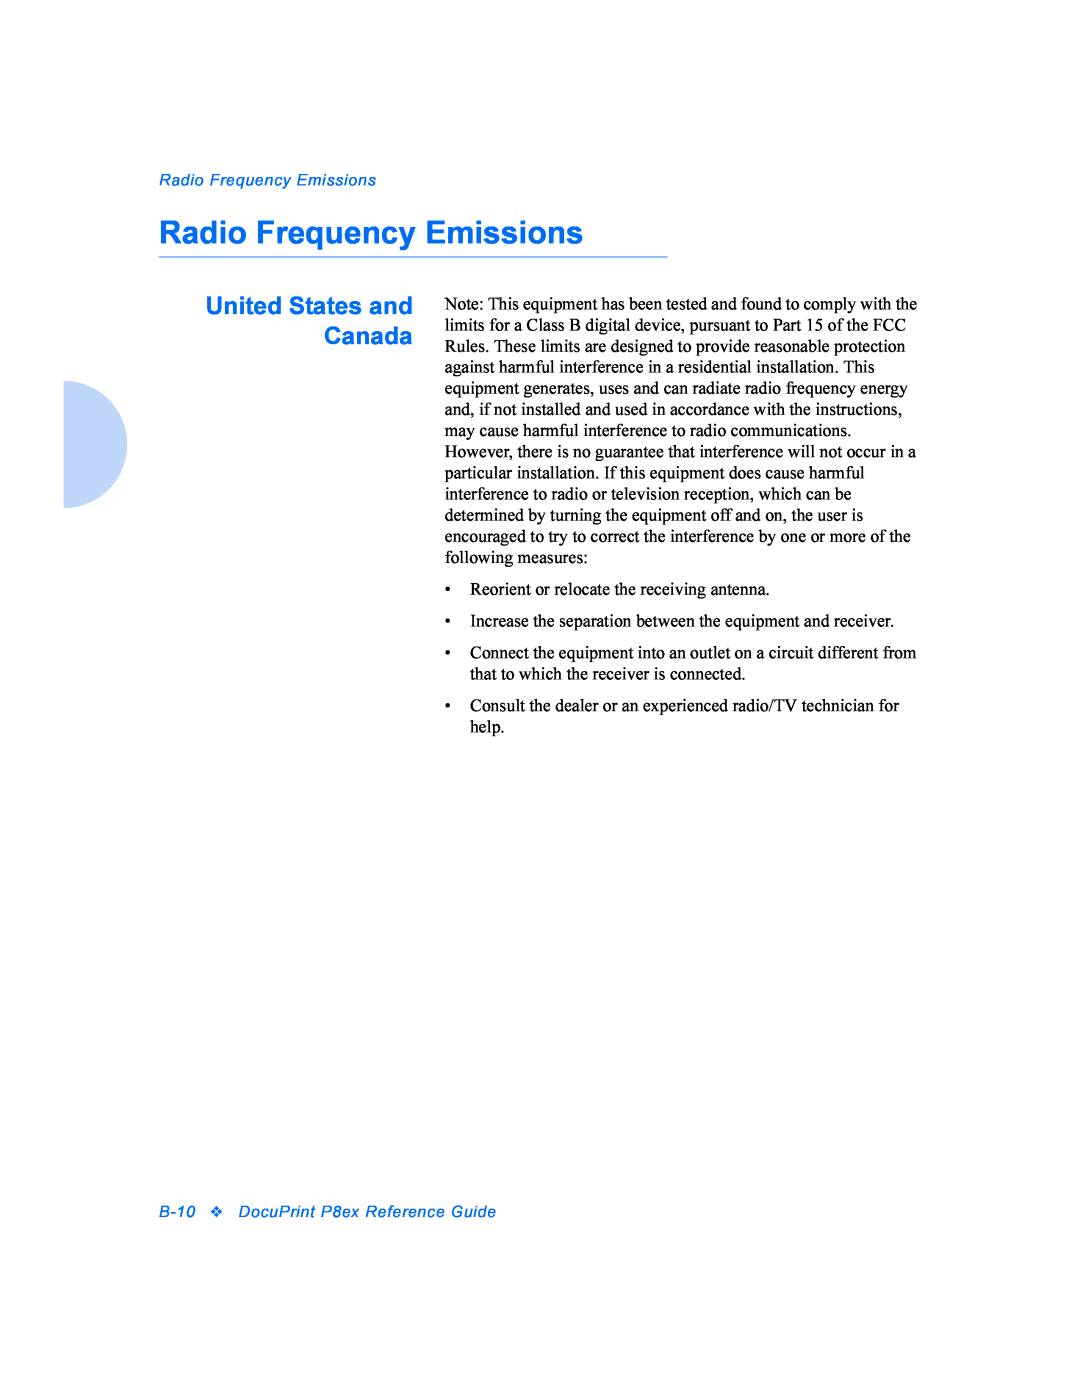 Xerox DocuPrint P8ex manual Radio Frequency Emissions, United States and Canada 